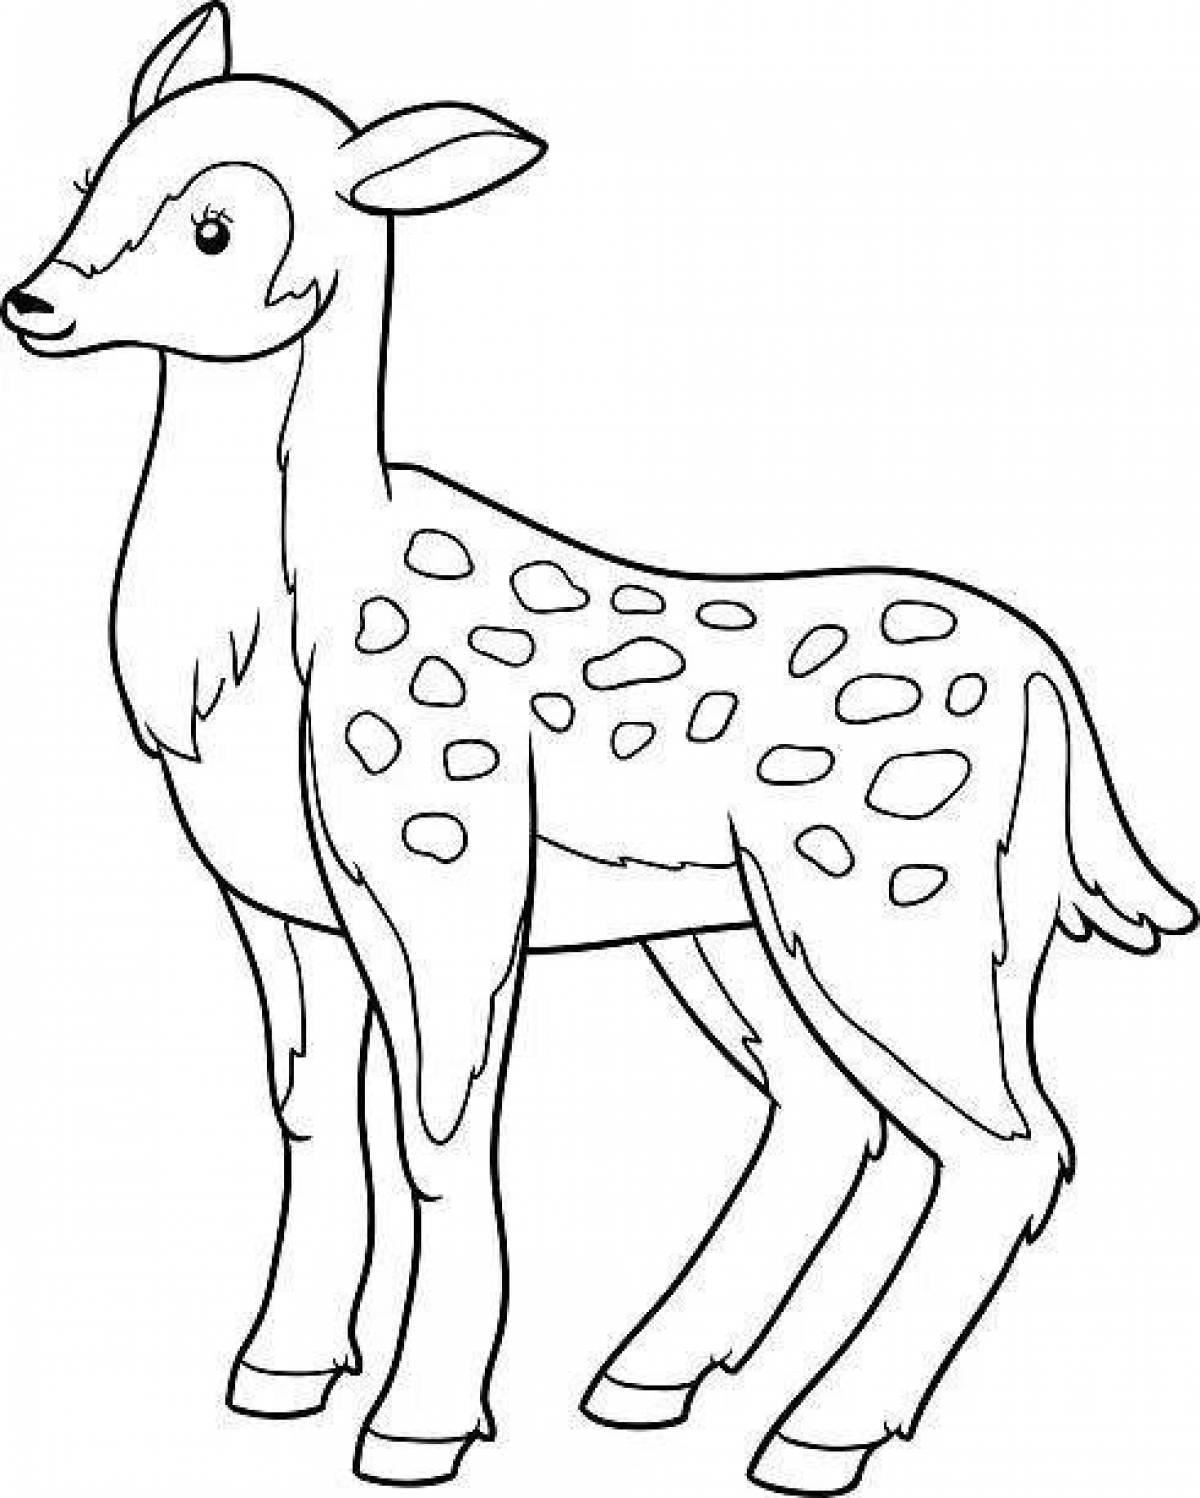 Adorable sika deer coloring page